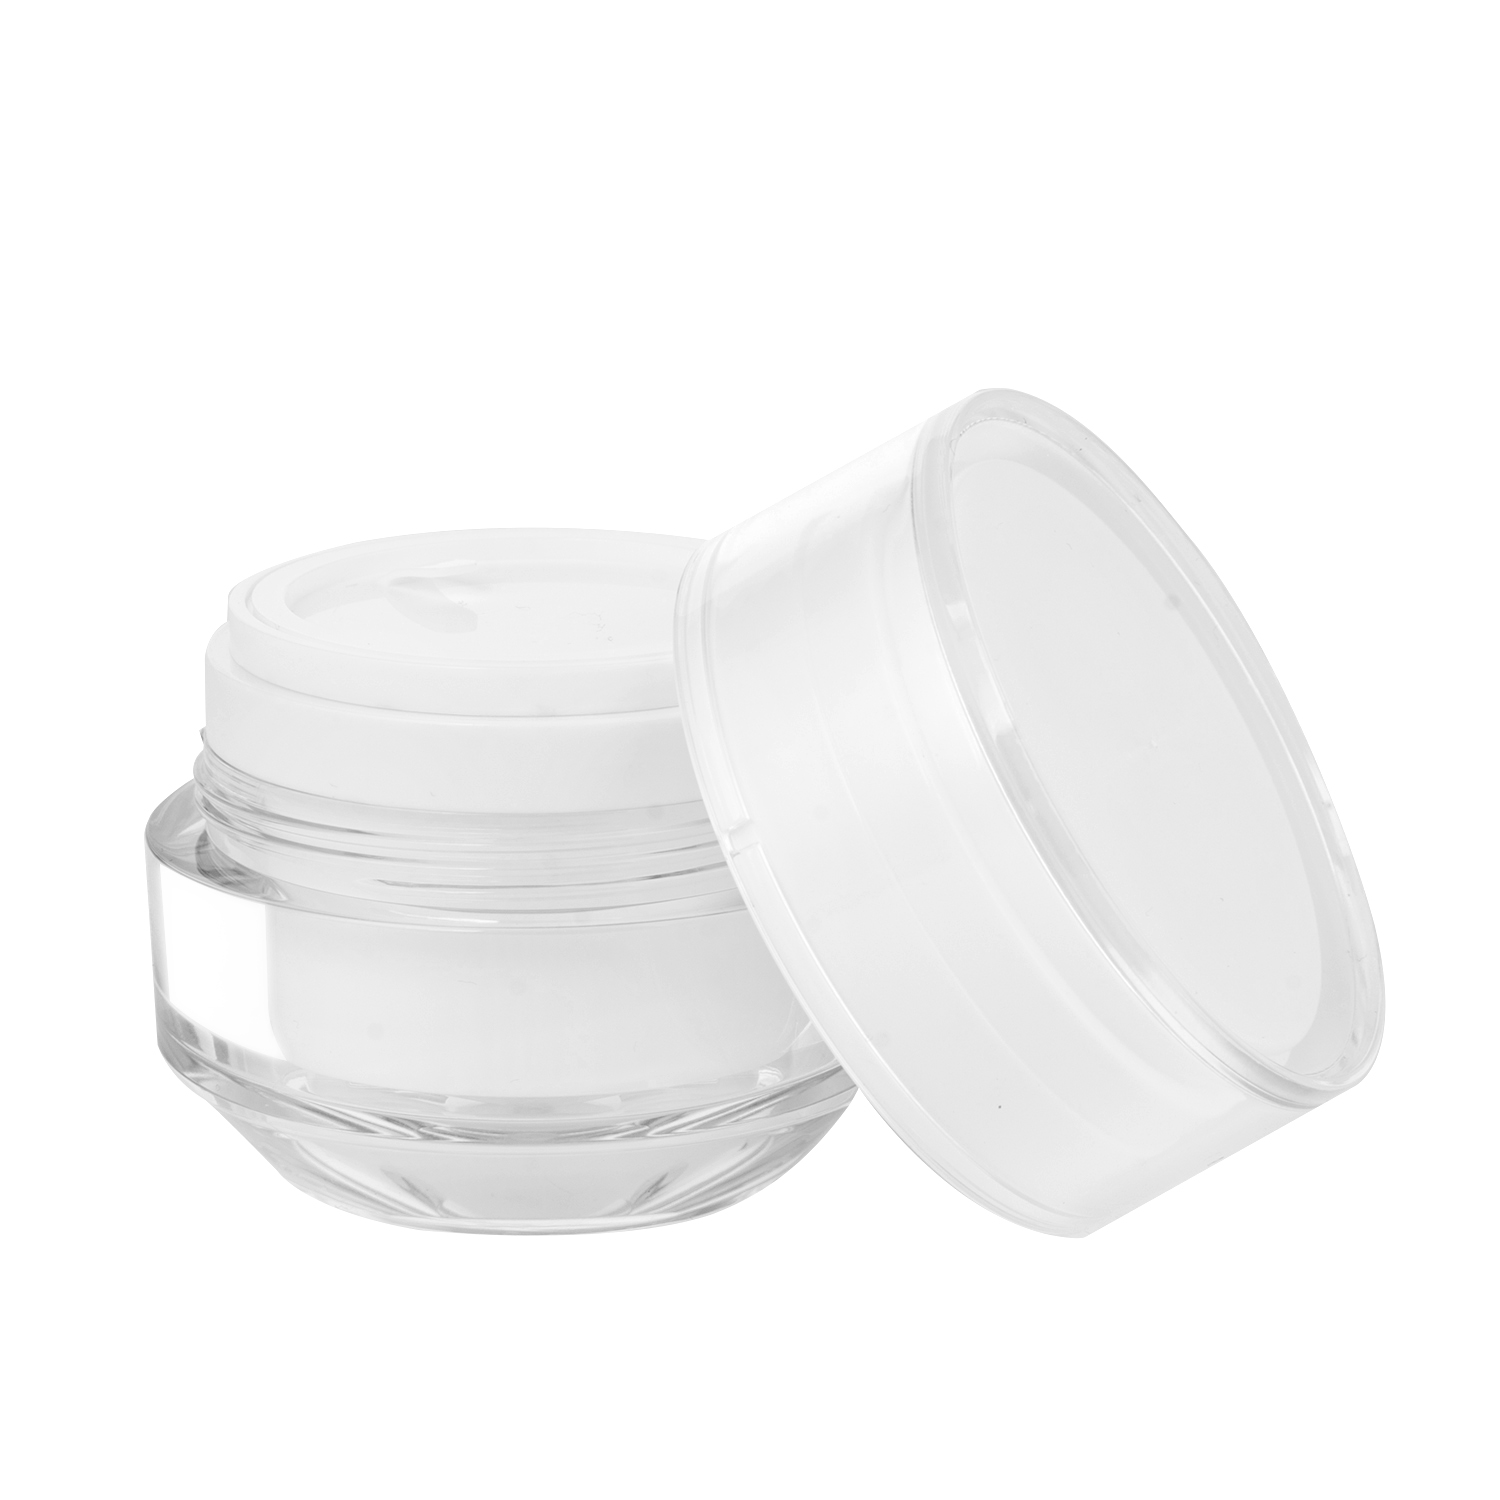 50g Refillable Plastic Jar With Replaceable Inner High Quality Sustainable Cosmetic Packaging